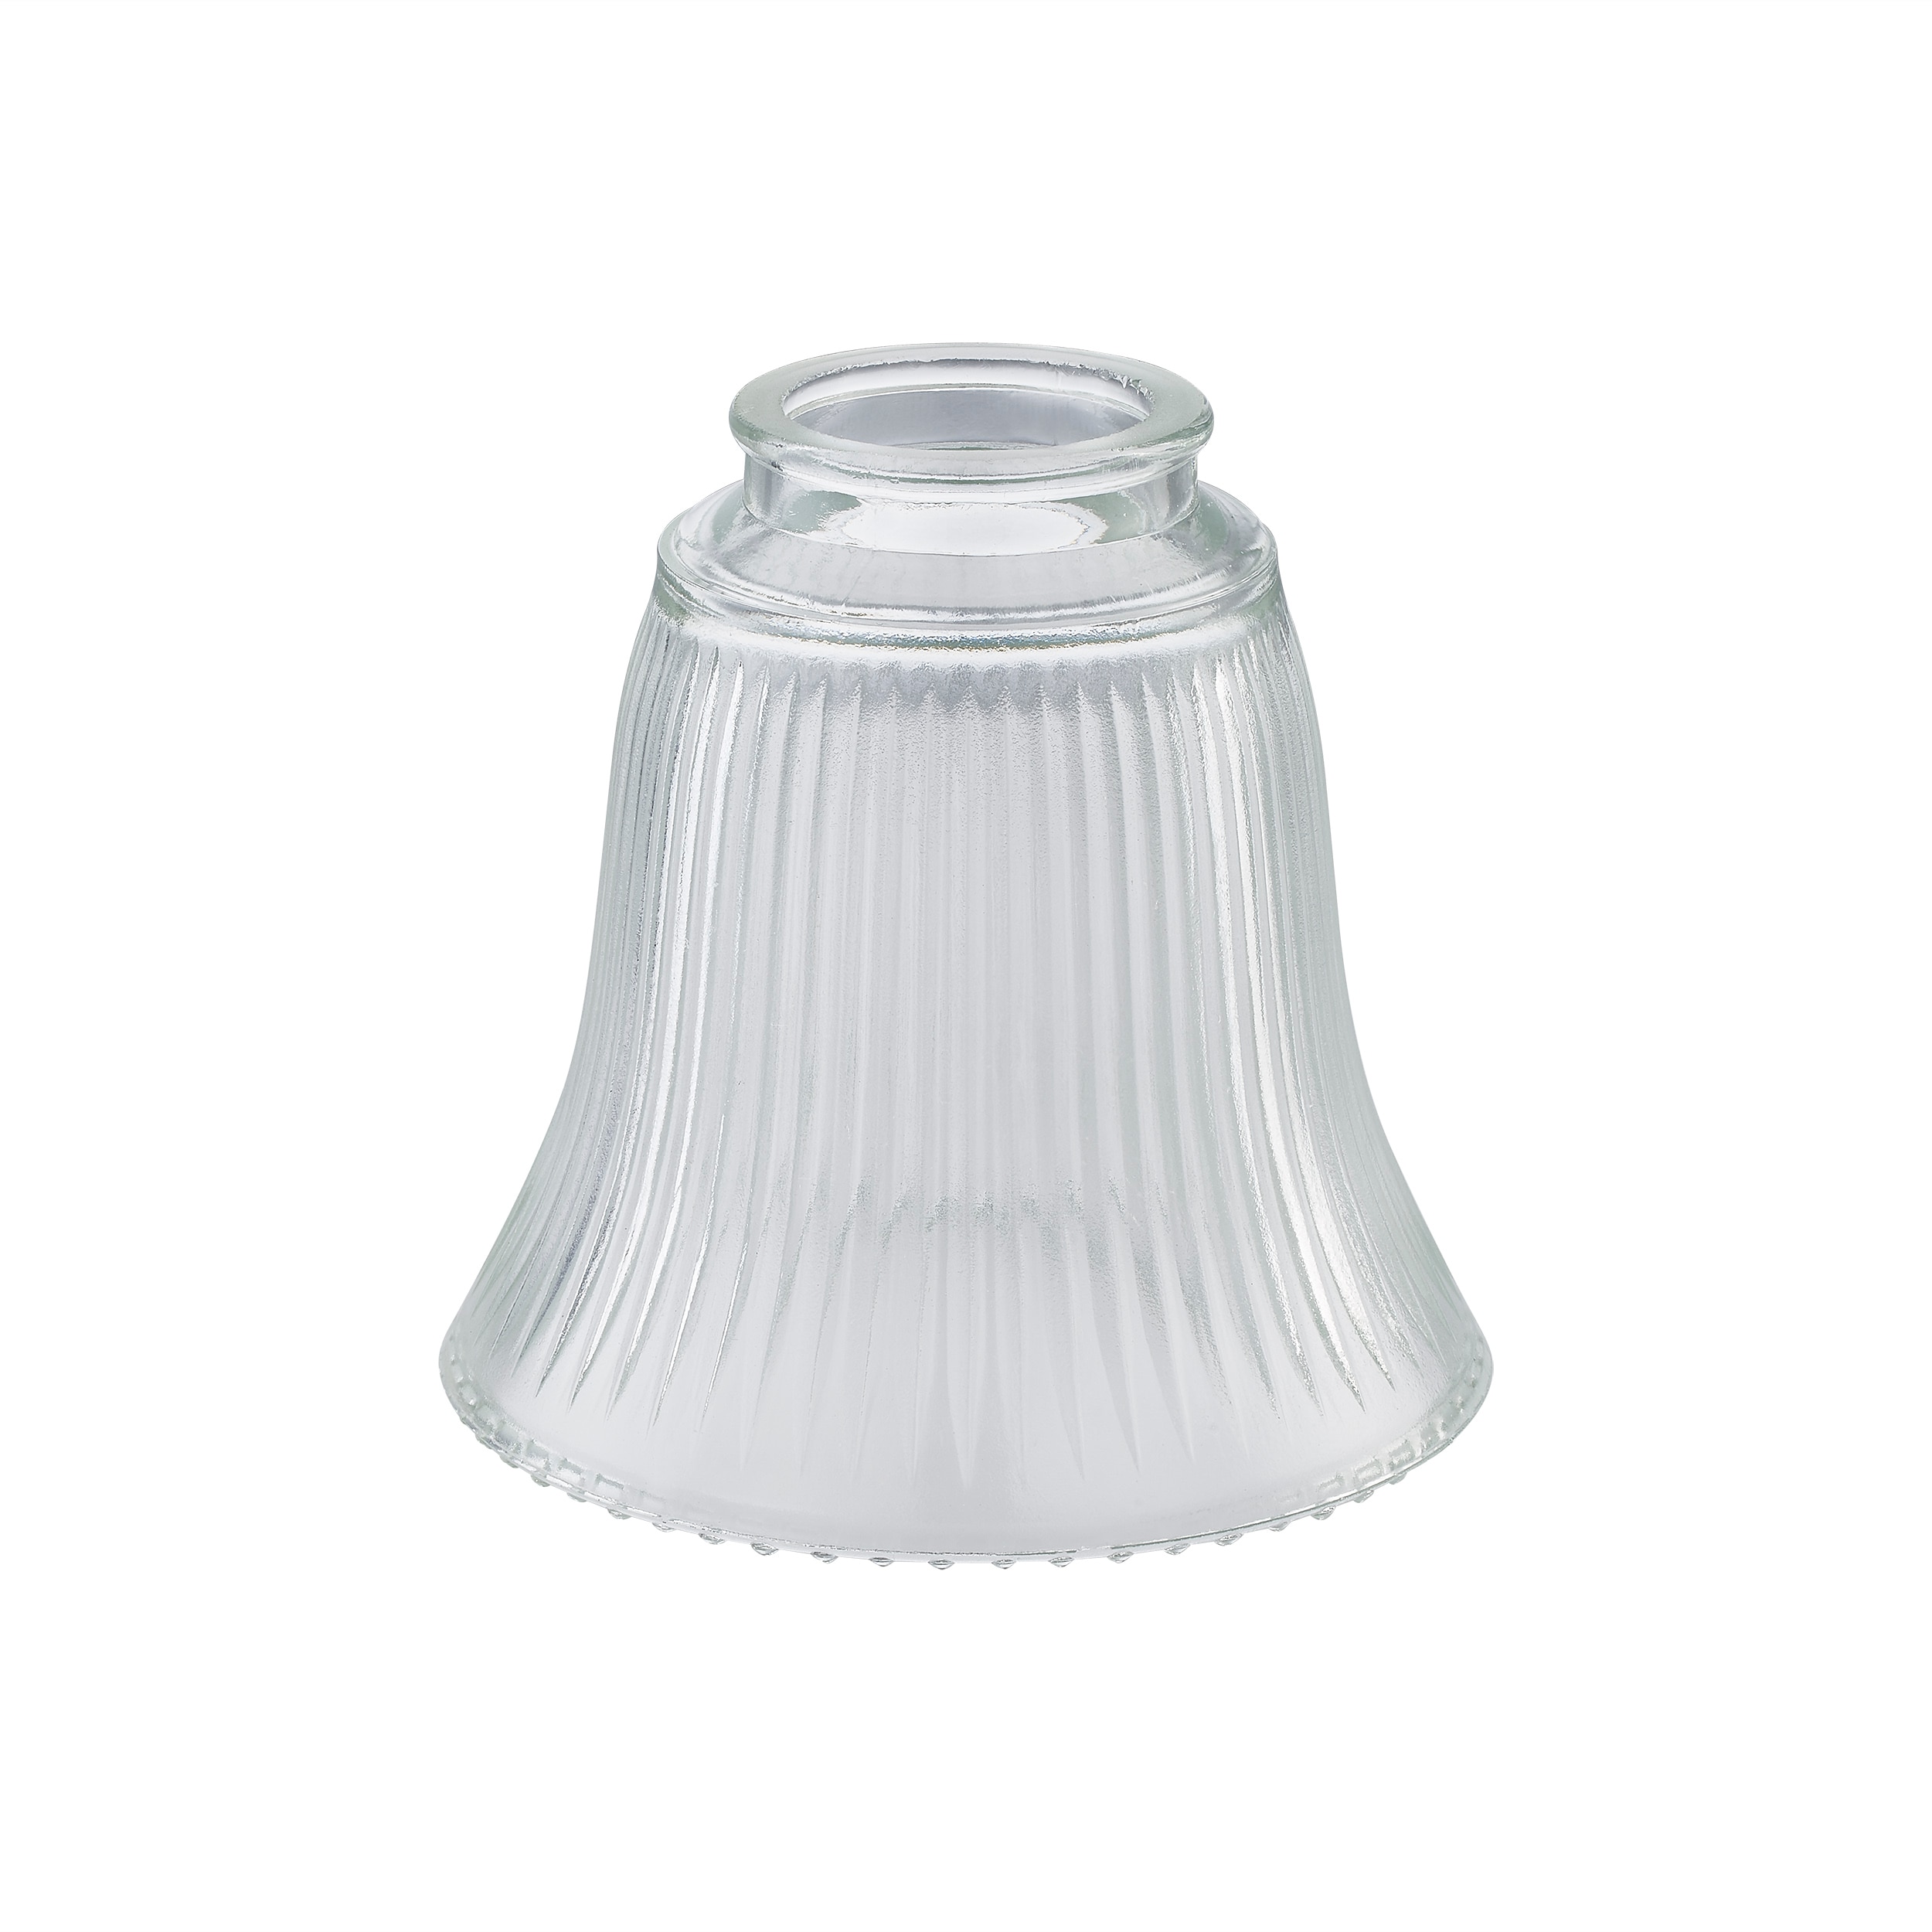 Details about   Glass Bell Pendant Lamp Shade Frosted Glass Shade 